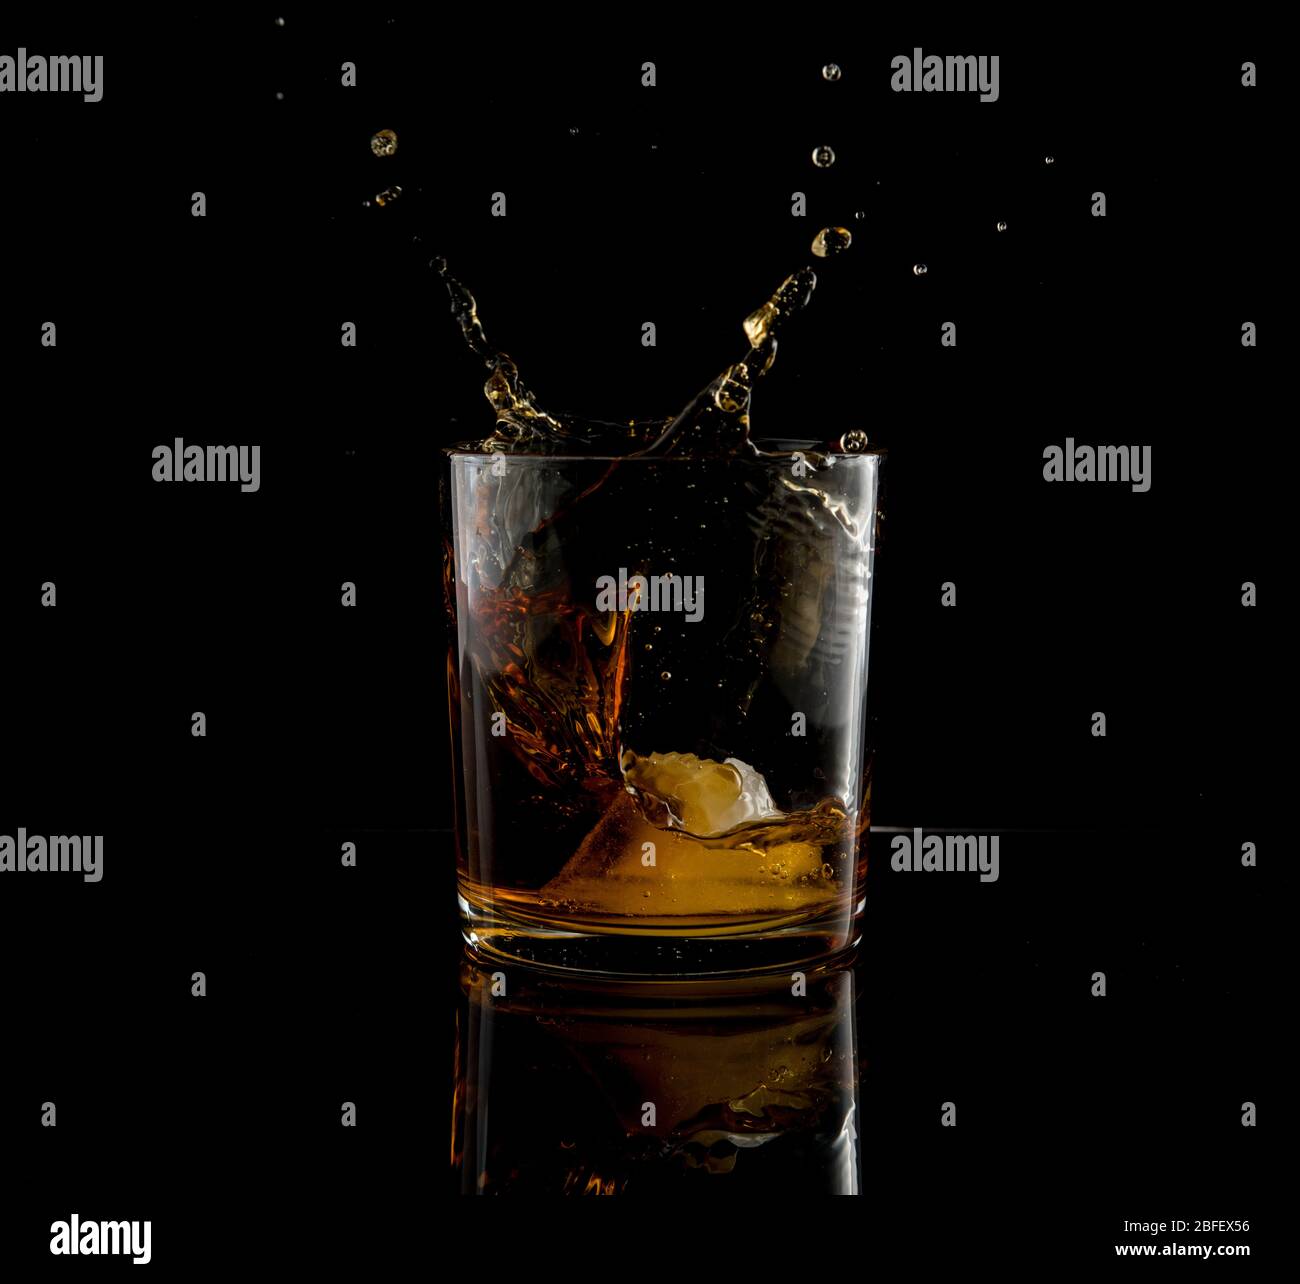 Splash in glass of whiskey and ice block falling on black background Stock Photo